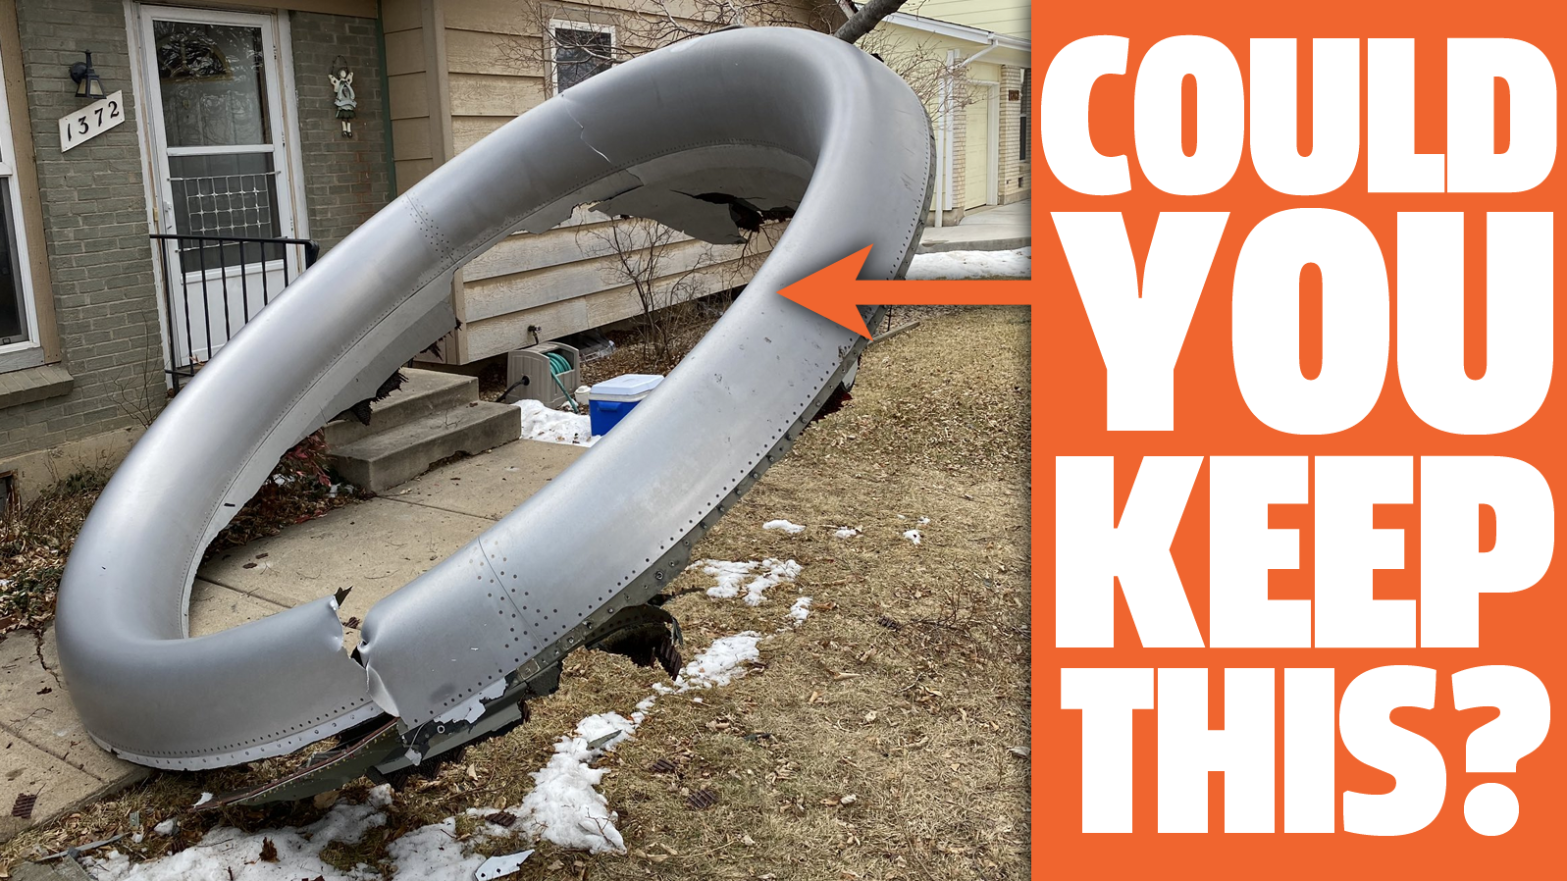 If Plane Parts Land On Your Lawn, Can You Keep Them?